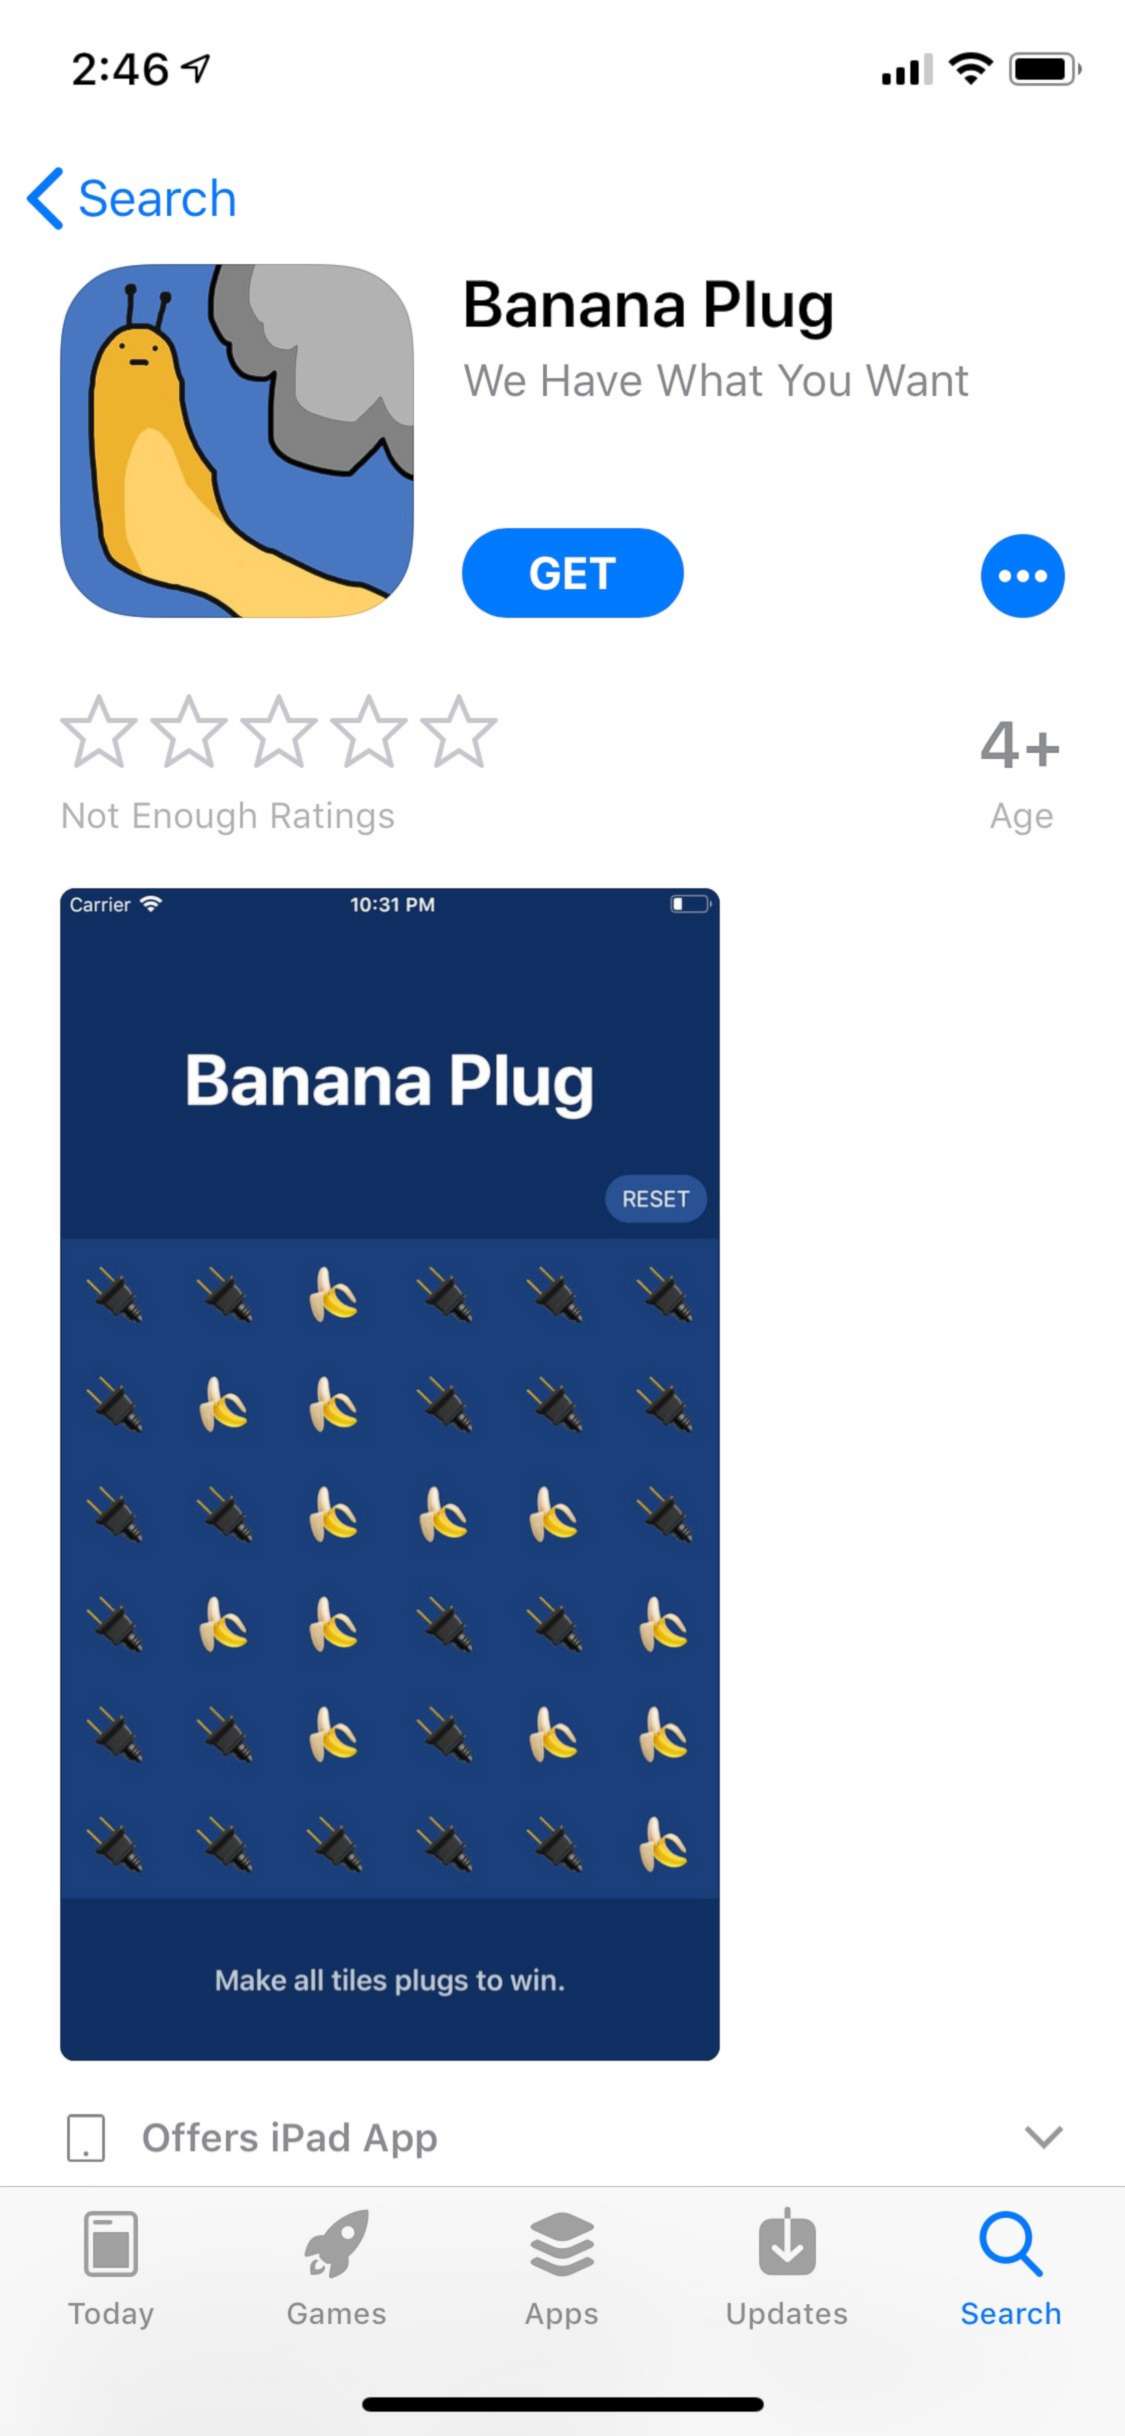 PHOTO: The Banana Plug app is still available for download on the iTunes store.